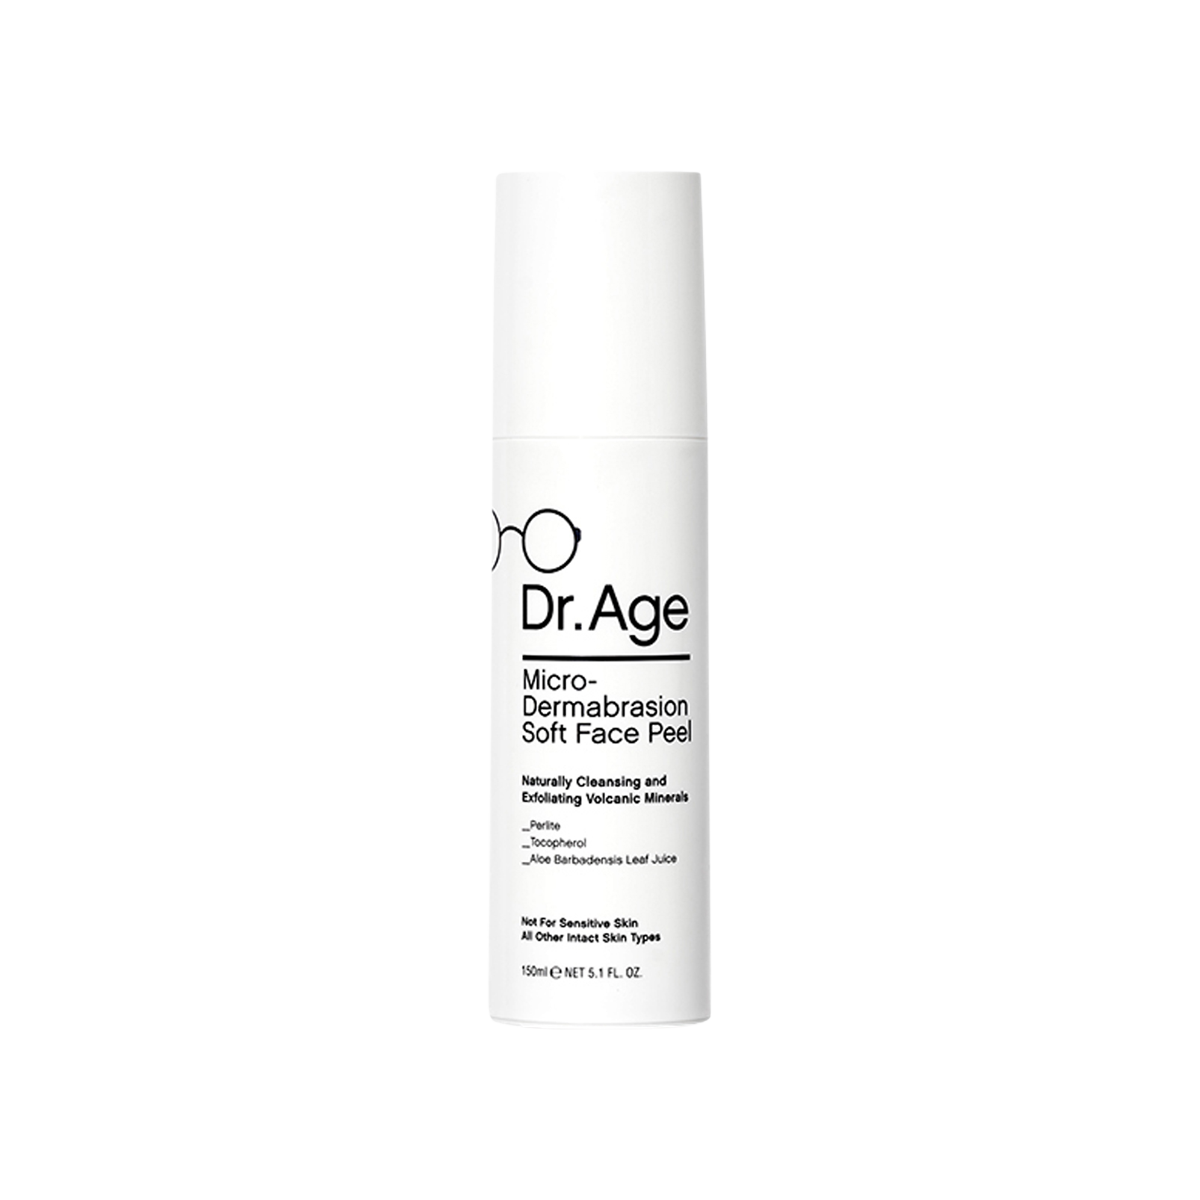 Dr. Age - Micro-dermabrasion Soft Face Peel